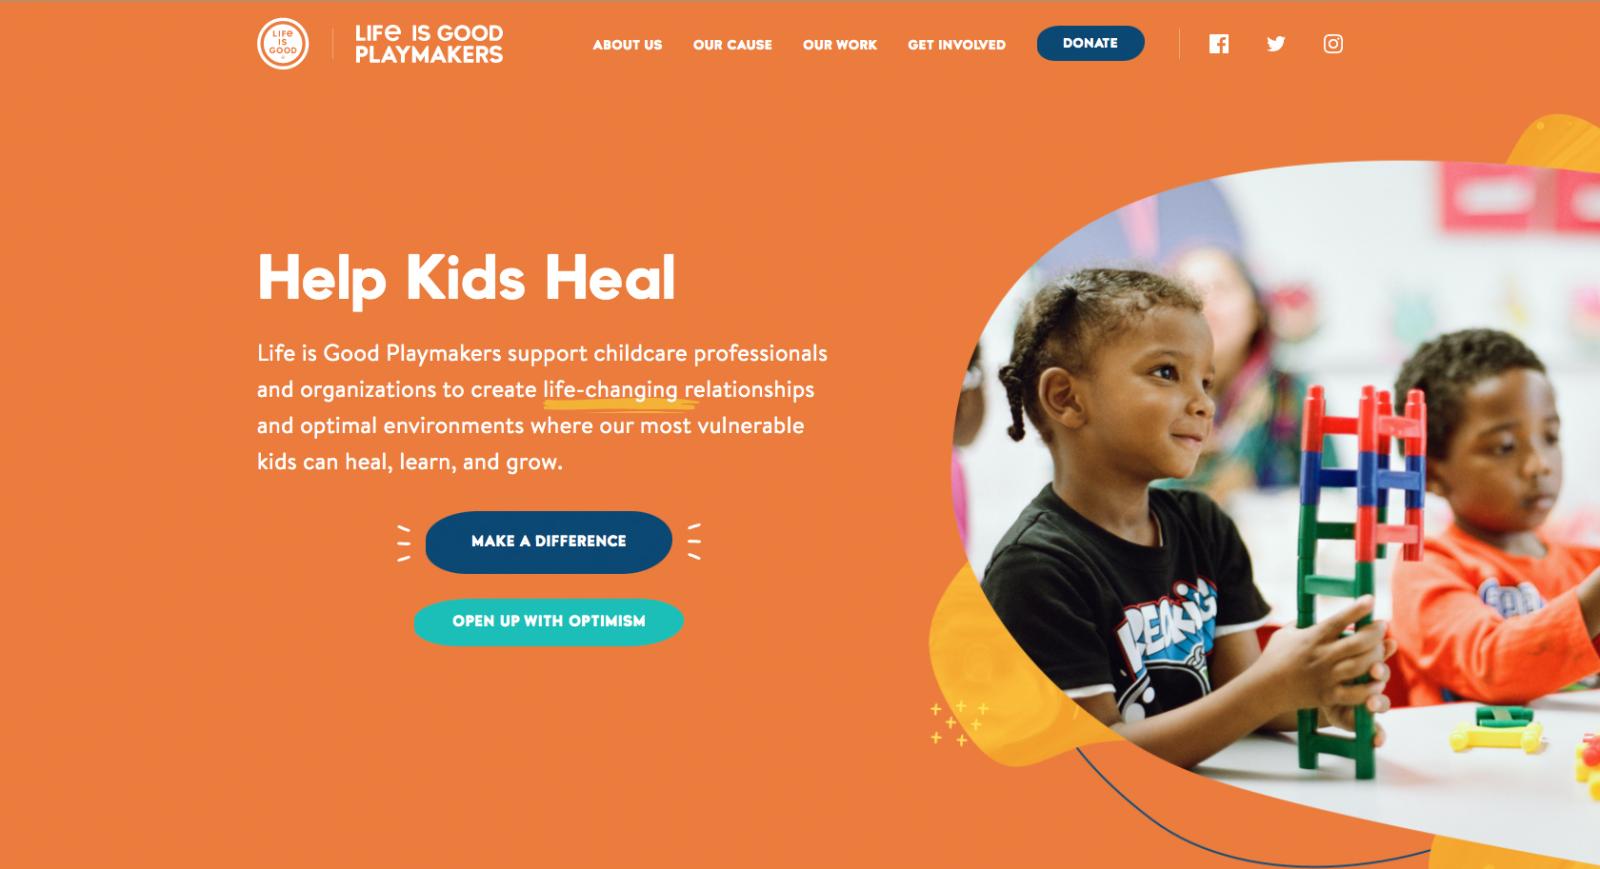 LIFE IS GOOD KIDS FOUNDATION / BRANDING IMAGES